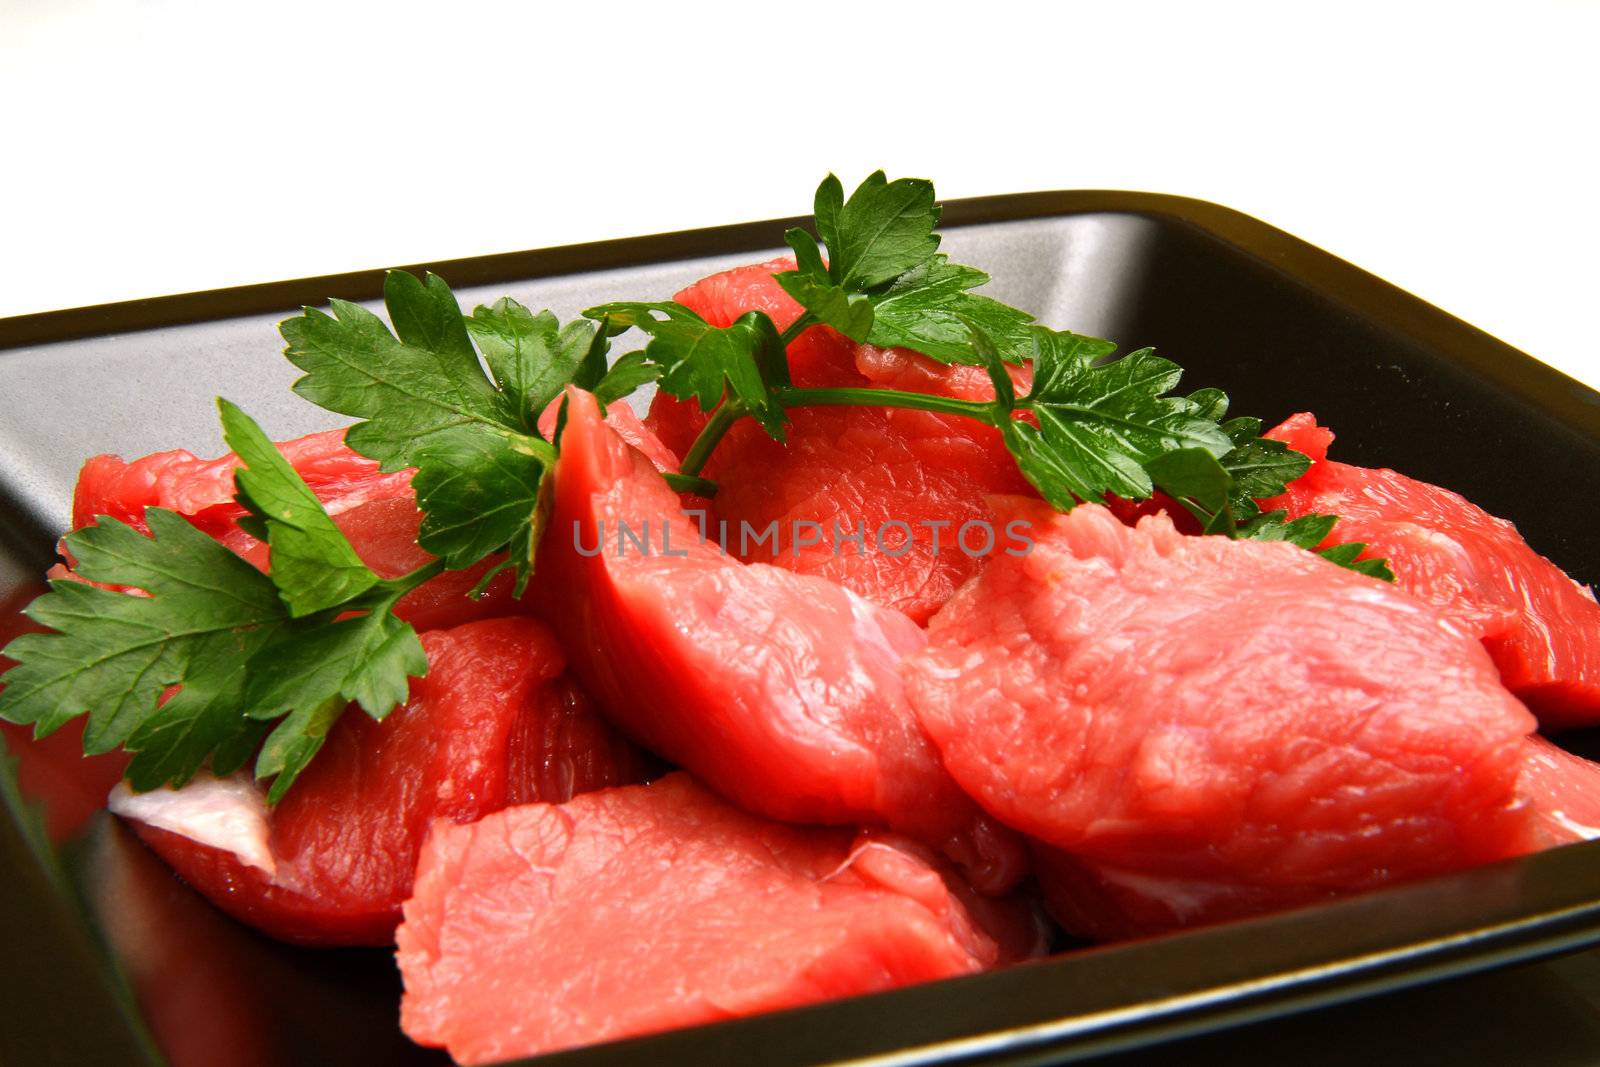 Raw fresh meat sliced in cubes